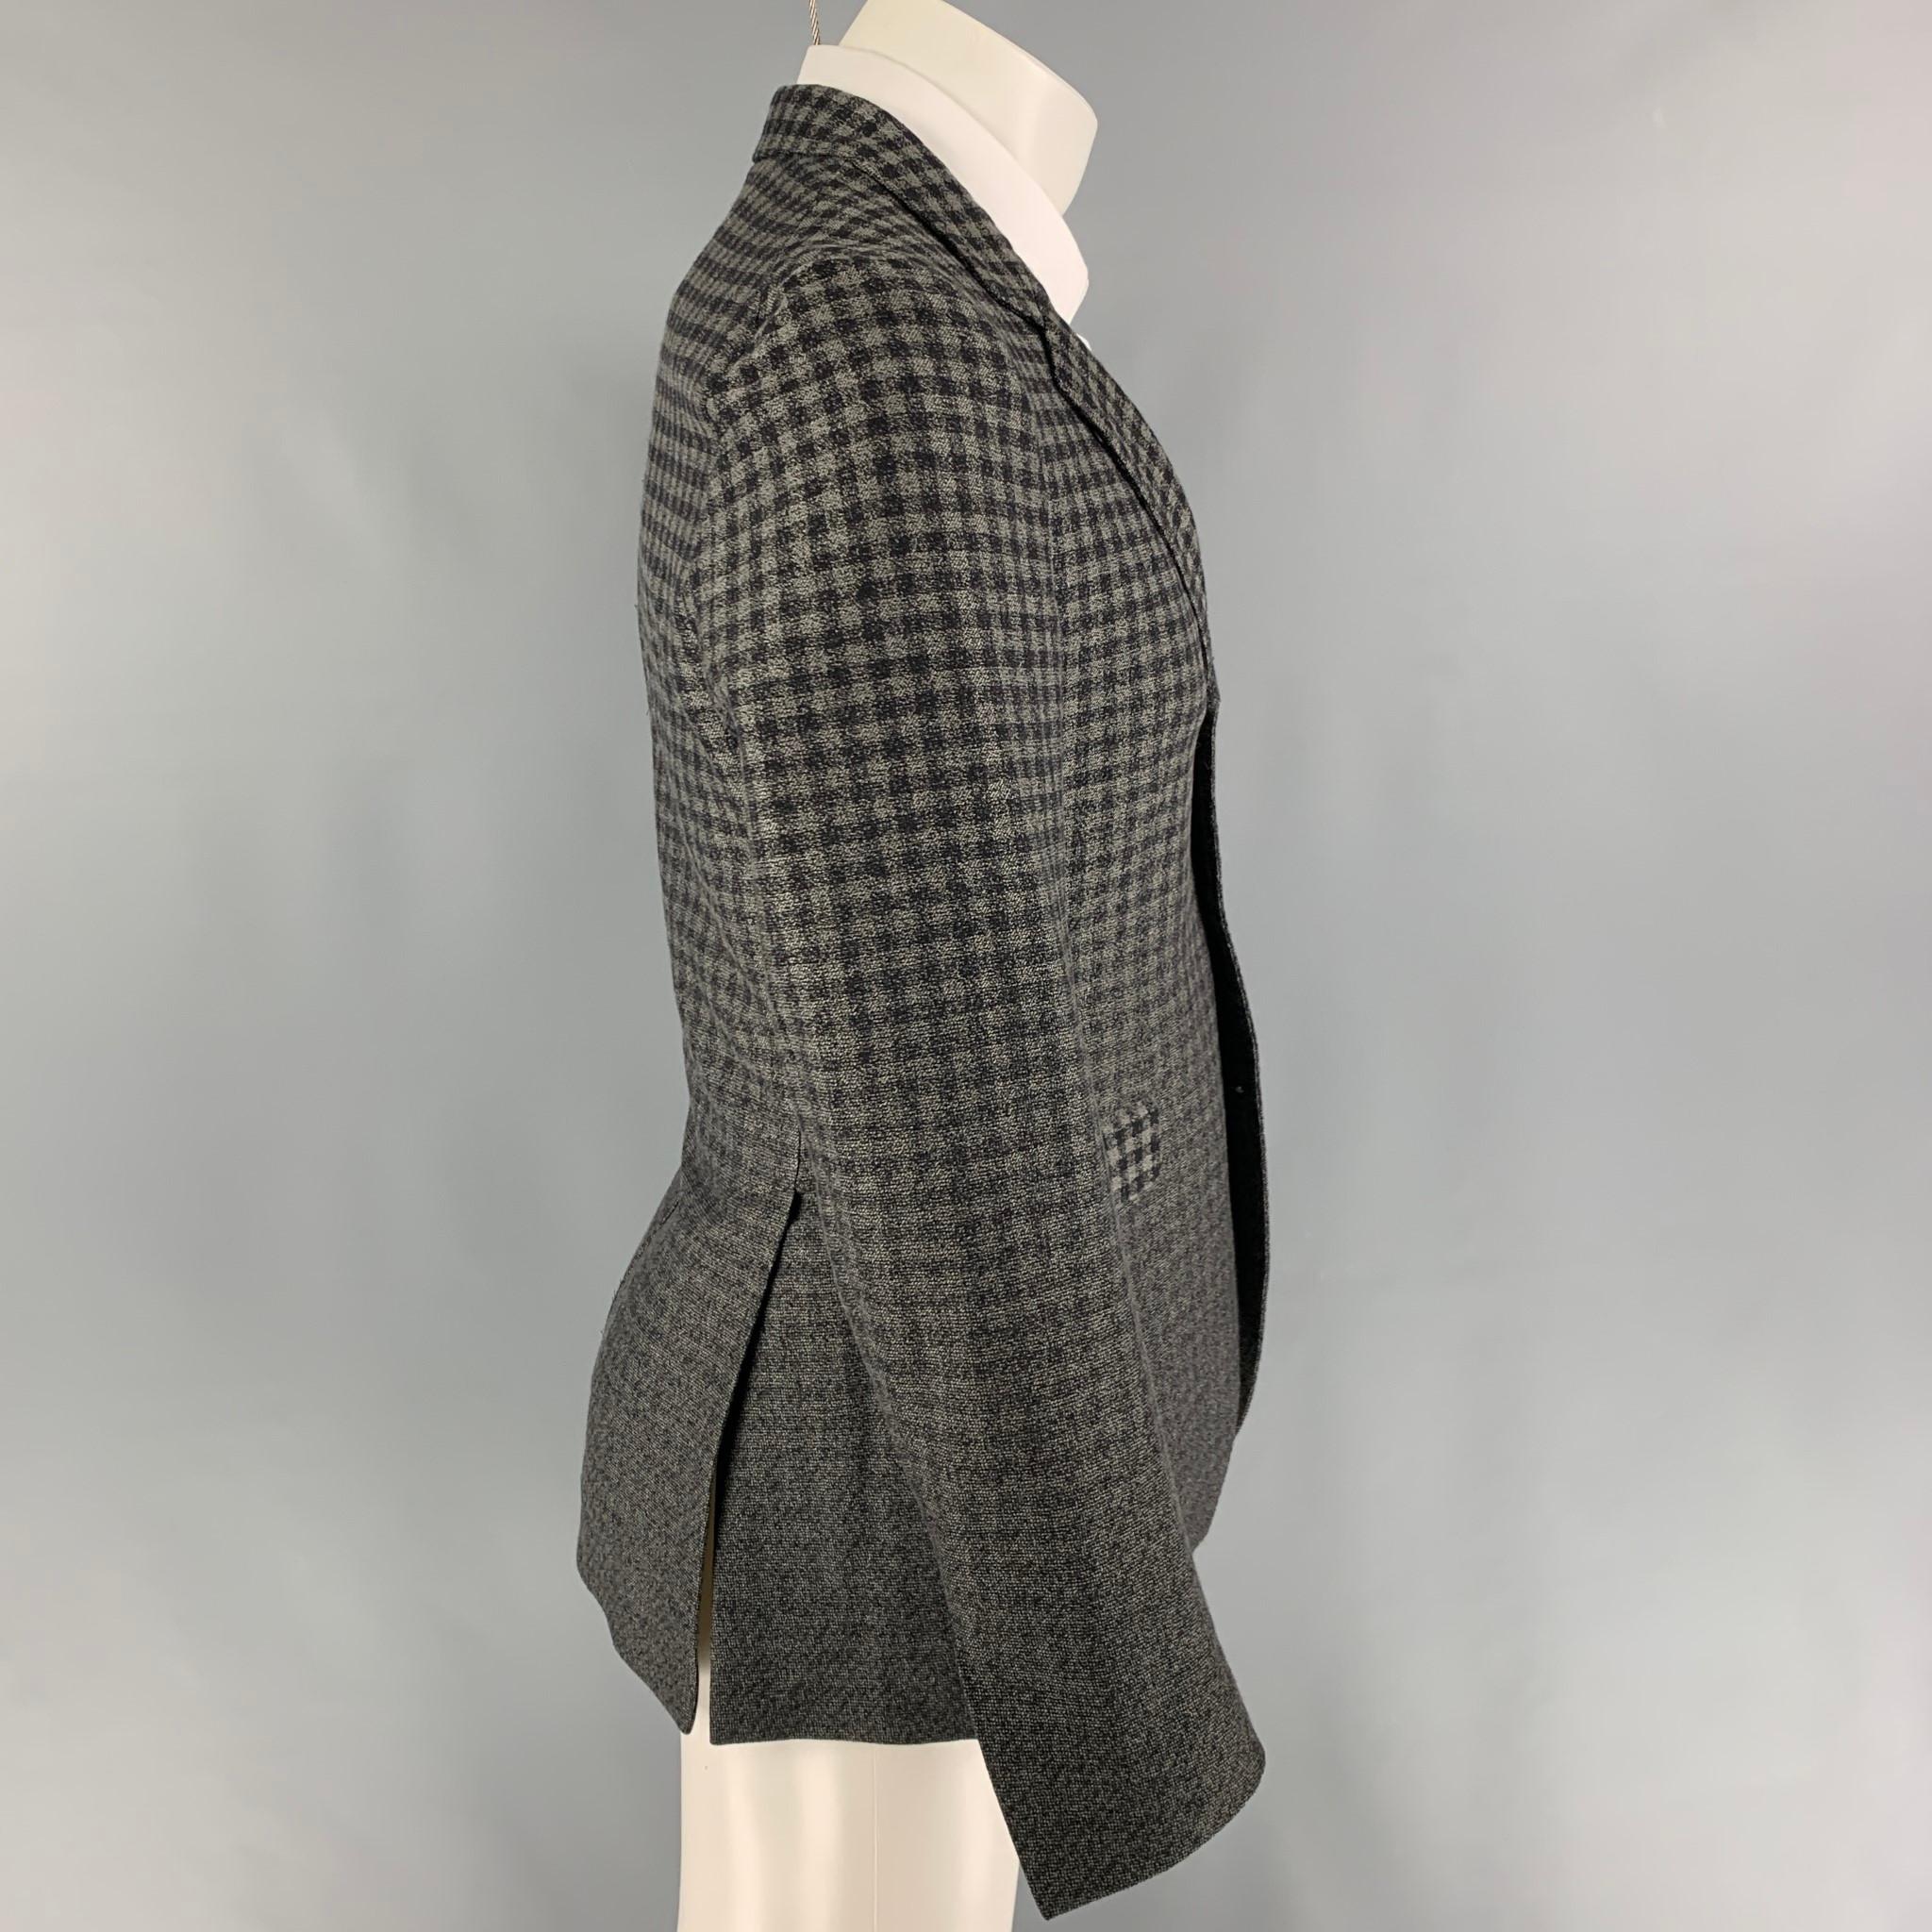 L'ECLAIREUR sport coat comes in a grey & black checkered cotton / wool with a half liner featuring a notch lapel, flap pockets, double back vent, and a three button closure. Made in Italy. 

Very Good Pre-Owned Condition.
Marked: